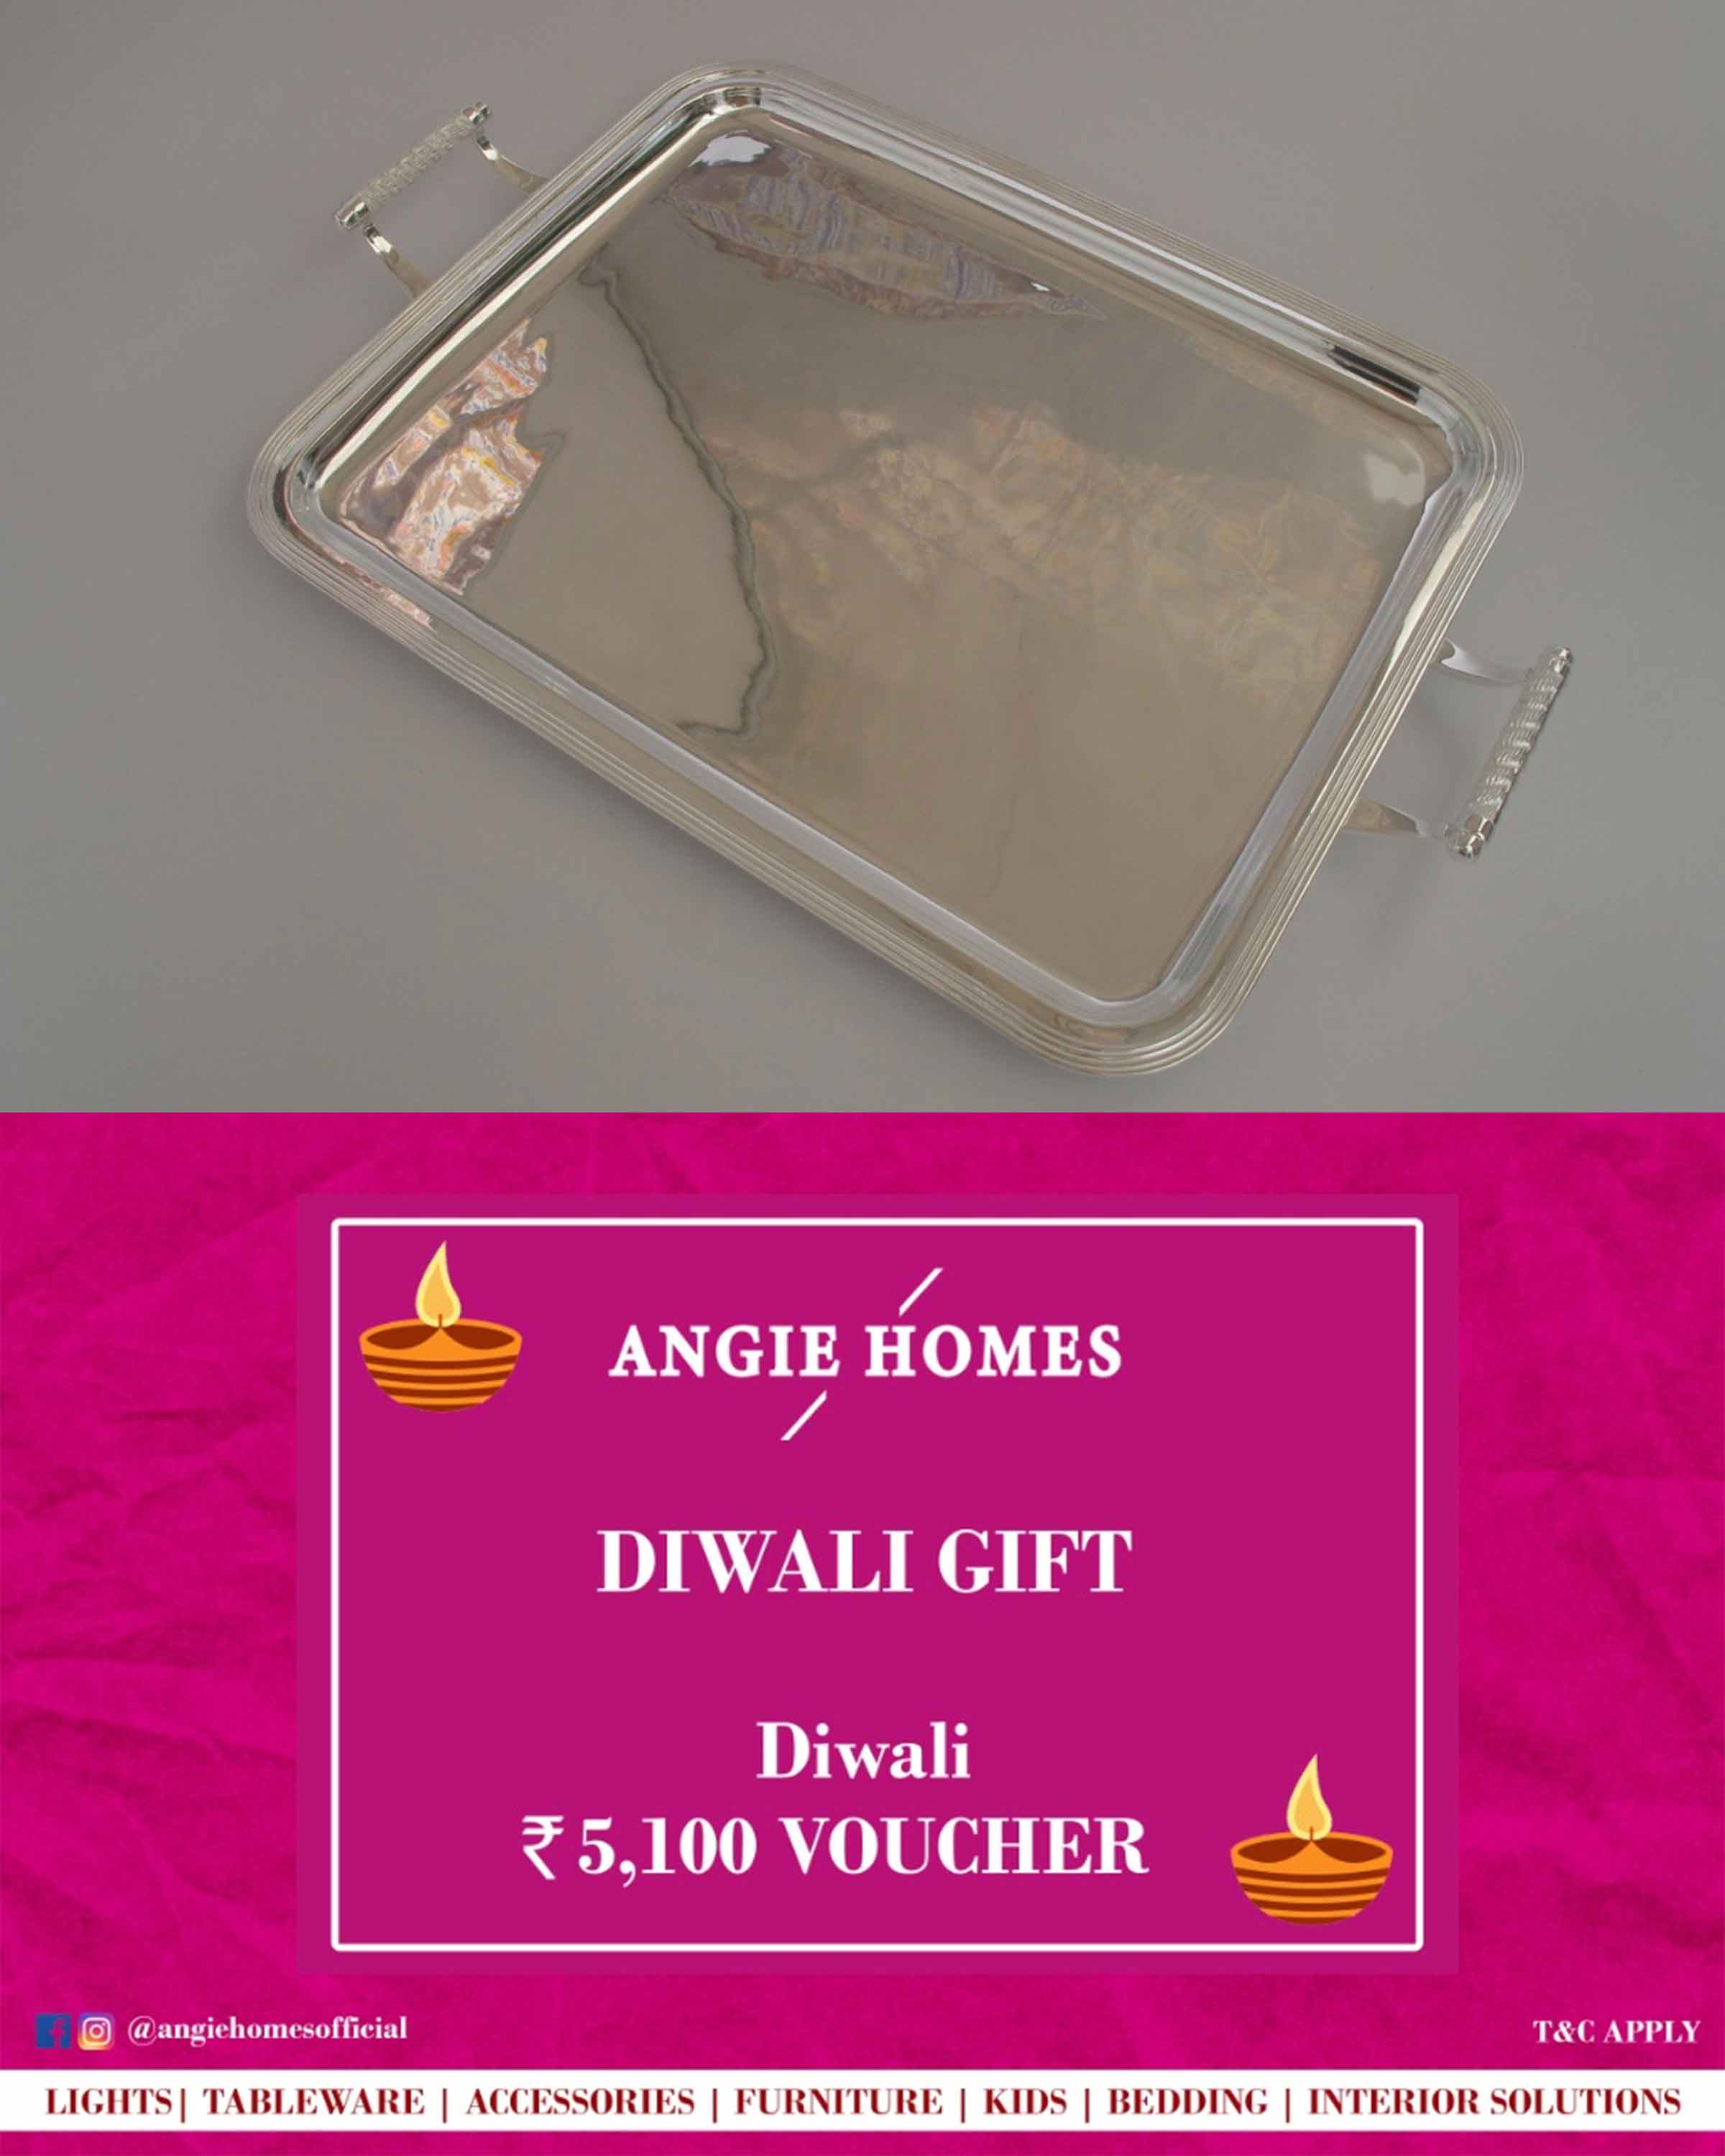 Online Diwali Gift Card Voucher for Rectangle Silver Plated Tray | Silverware ANGIE HOMES